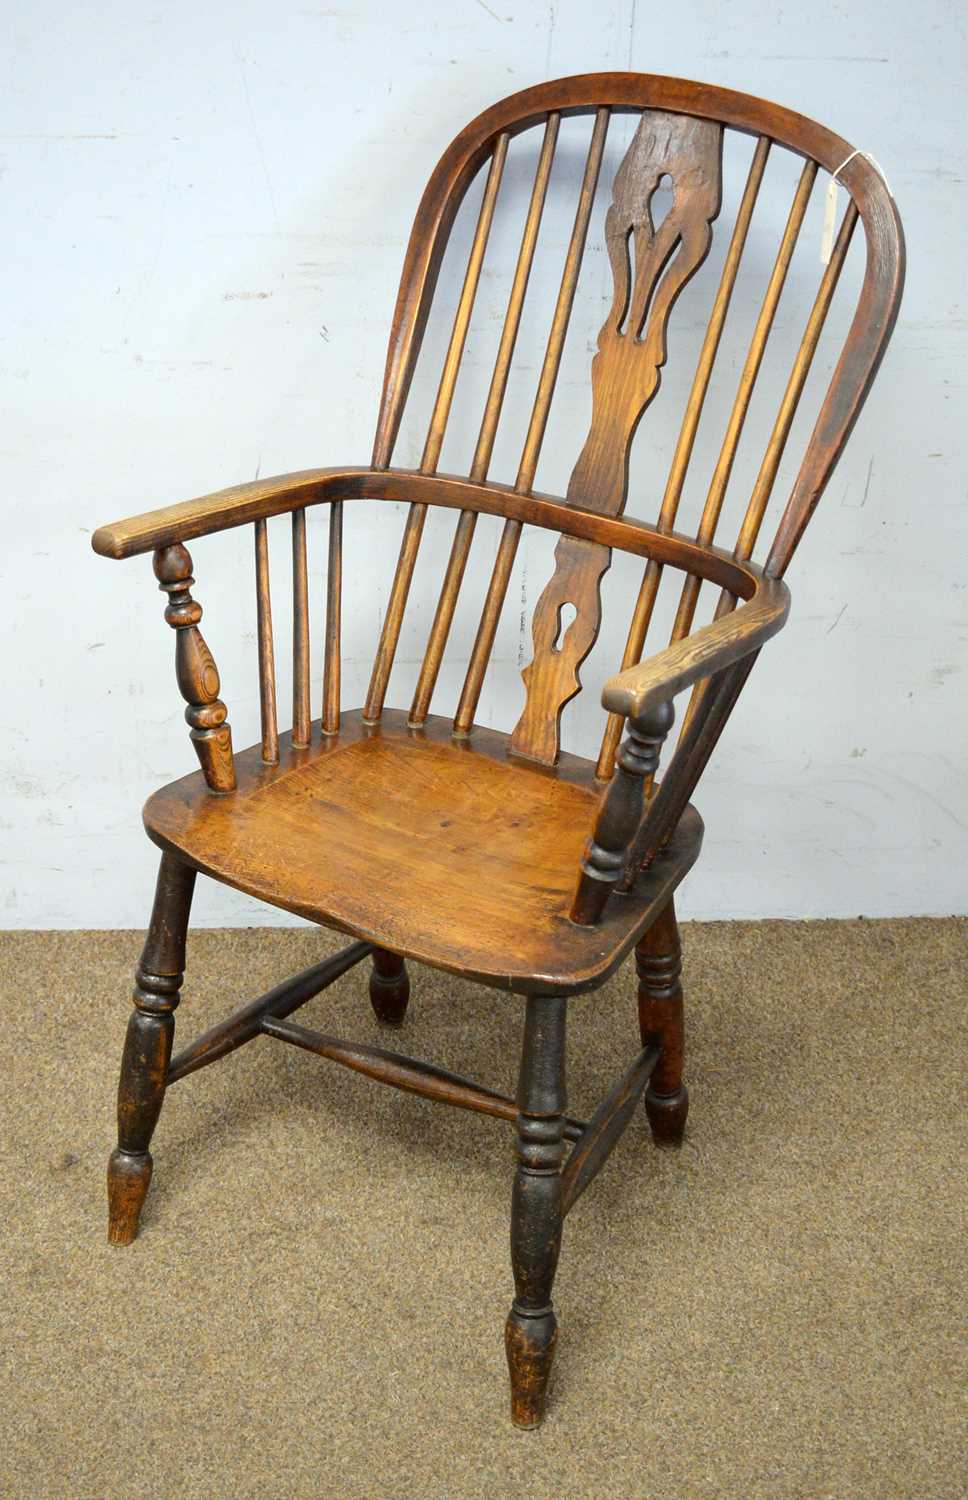 A ash and elm Windsor armchair with stretcher.